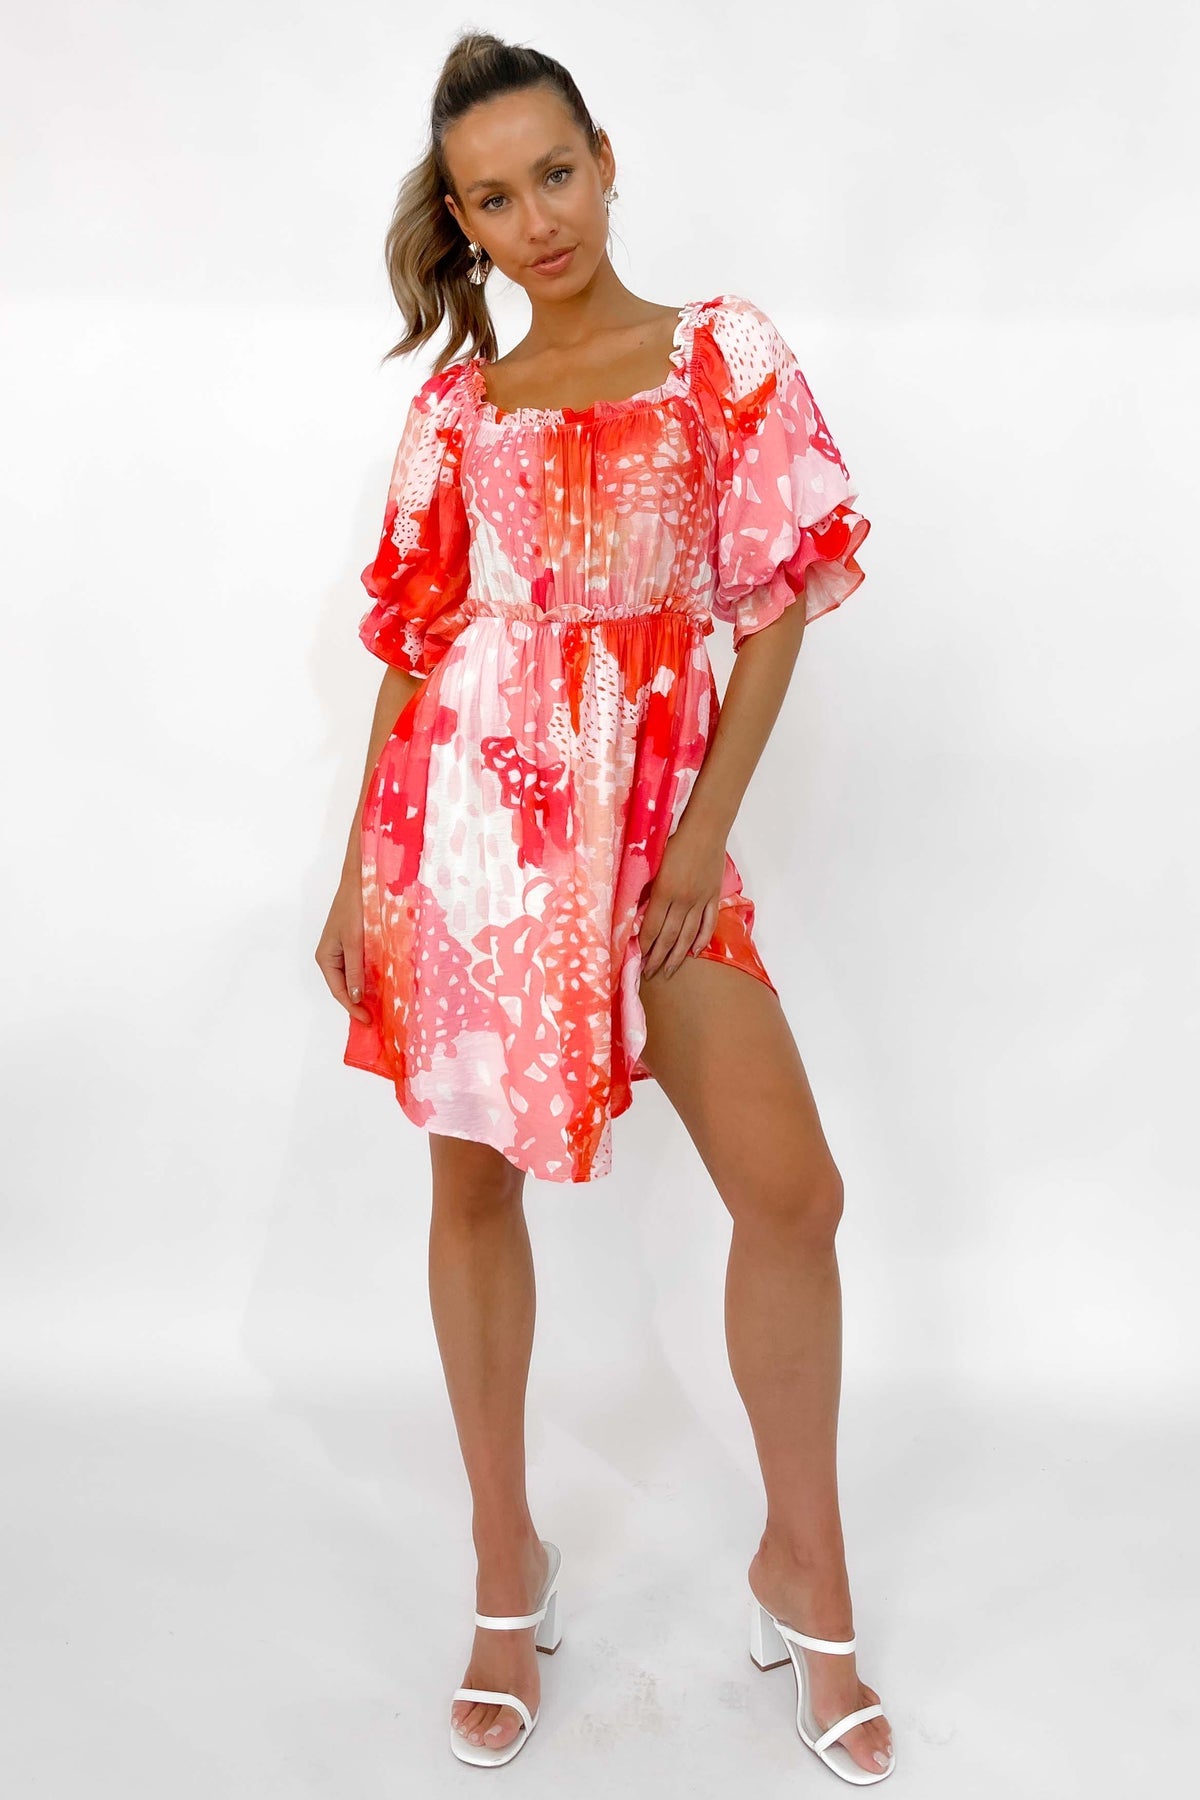 Jalissia Dress, BALLOON SLEEVE, COTTON &amp; POLYESTER, COTTON AND POLYESTER, DRESS, DRESSES, MINI DRESS, new arrivals, PINK, POLYESTER AND COTTON, , -MISHKAH